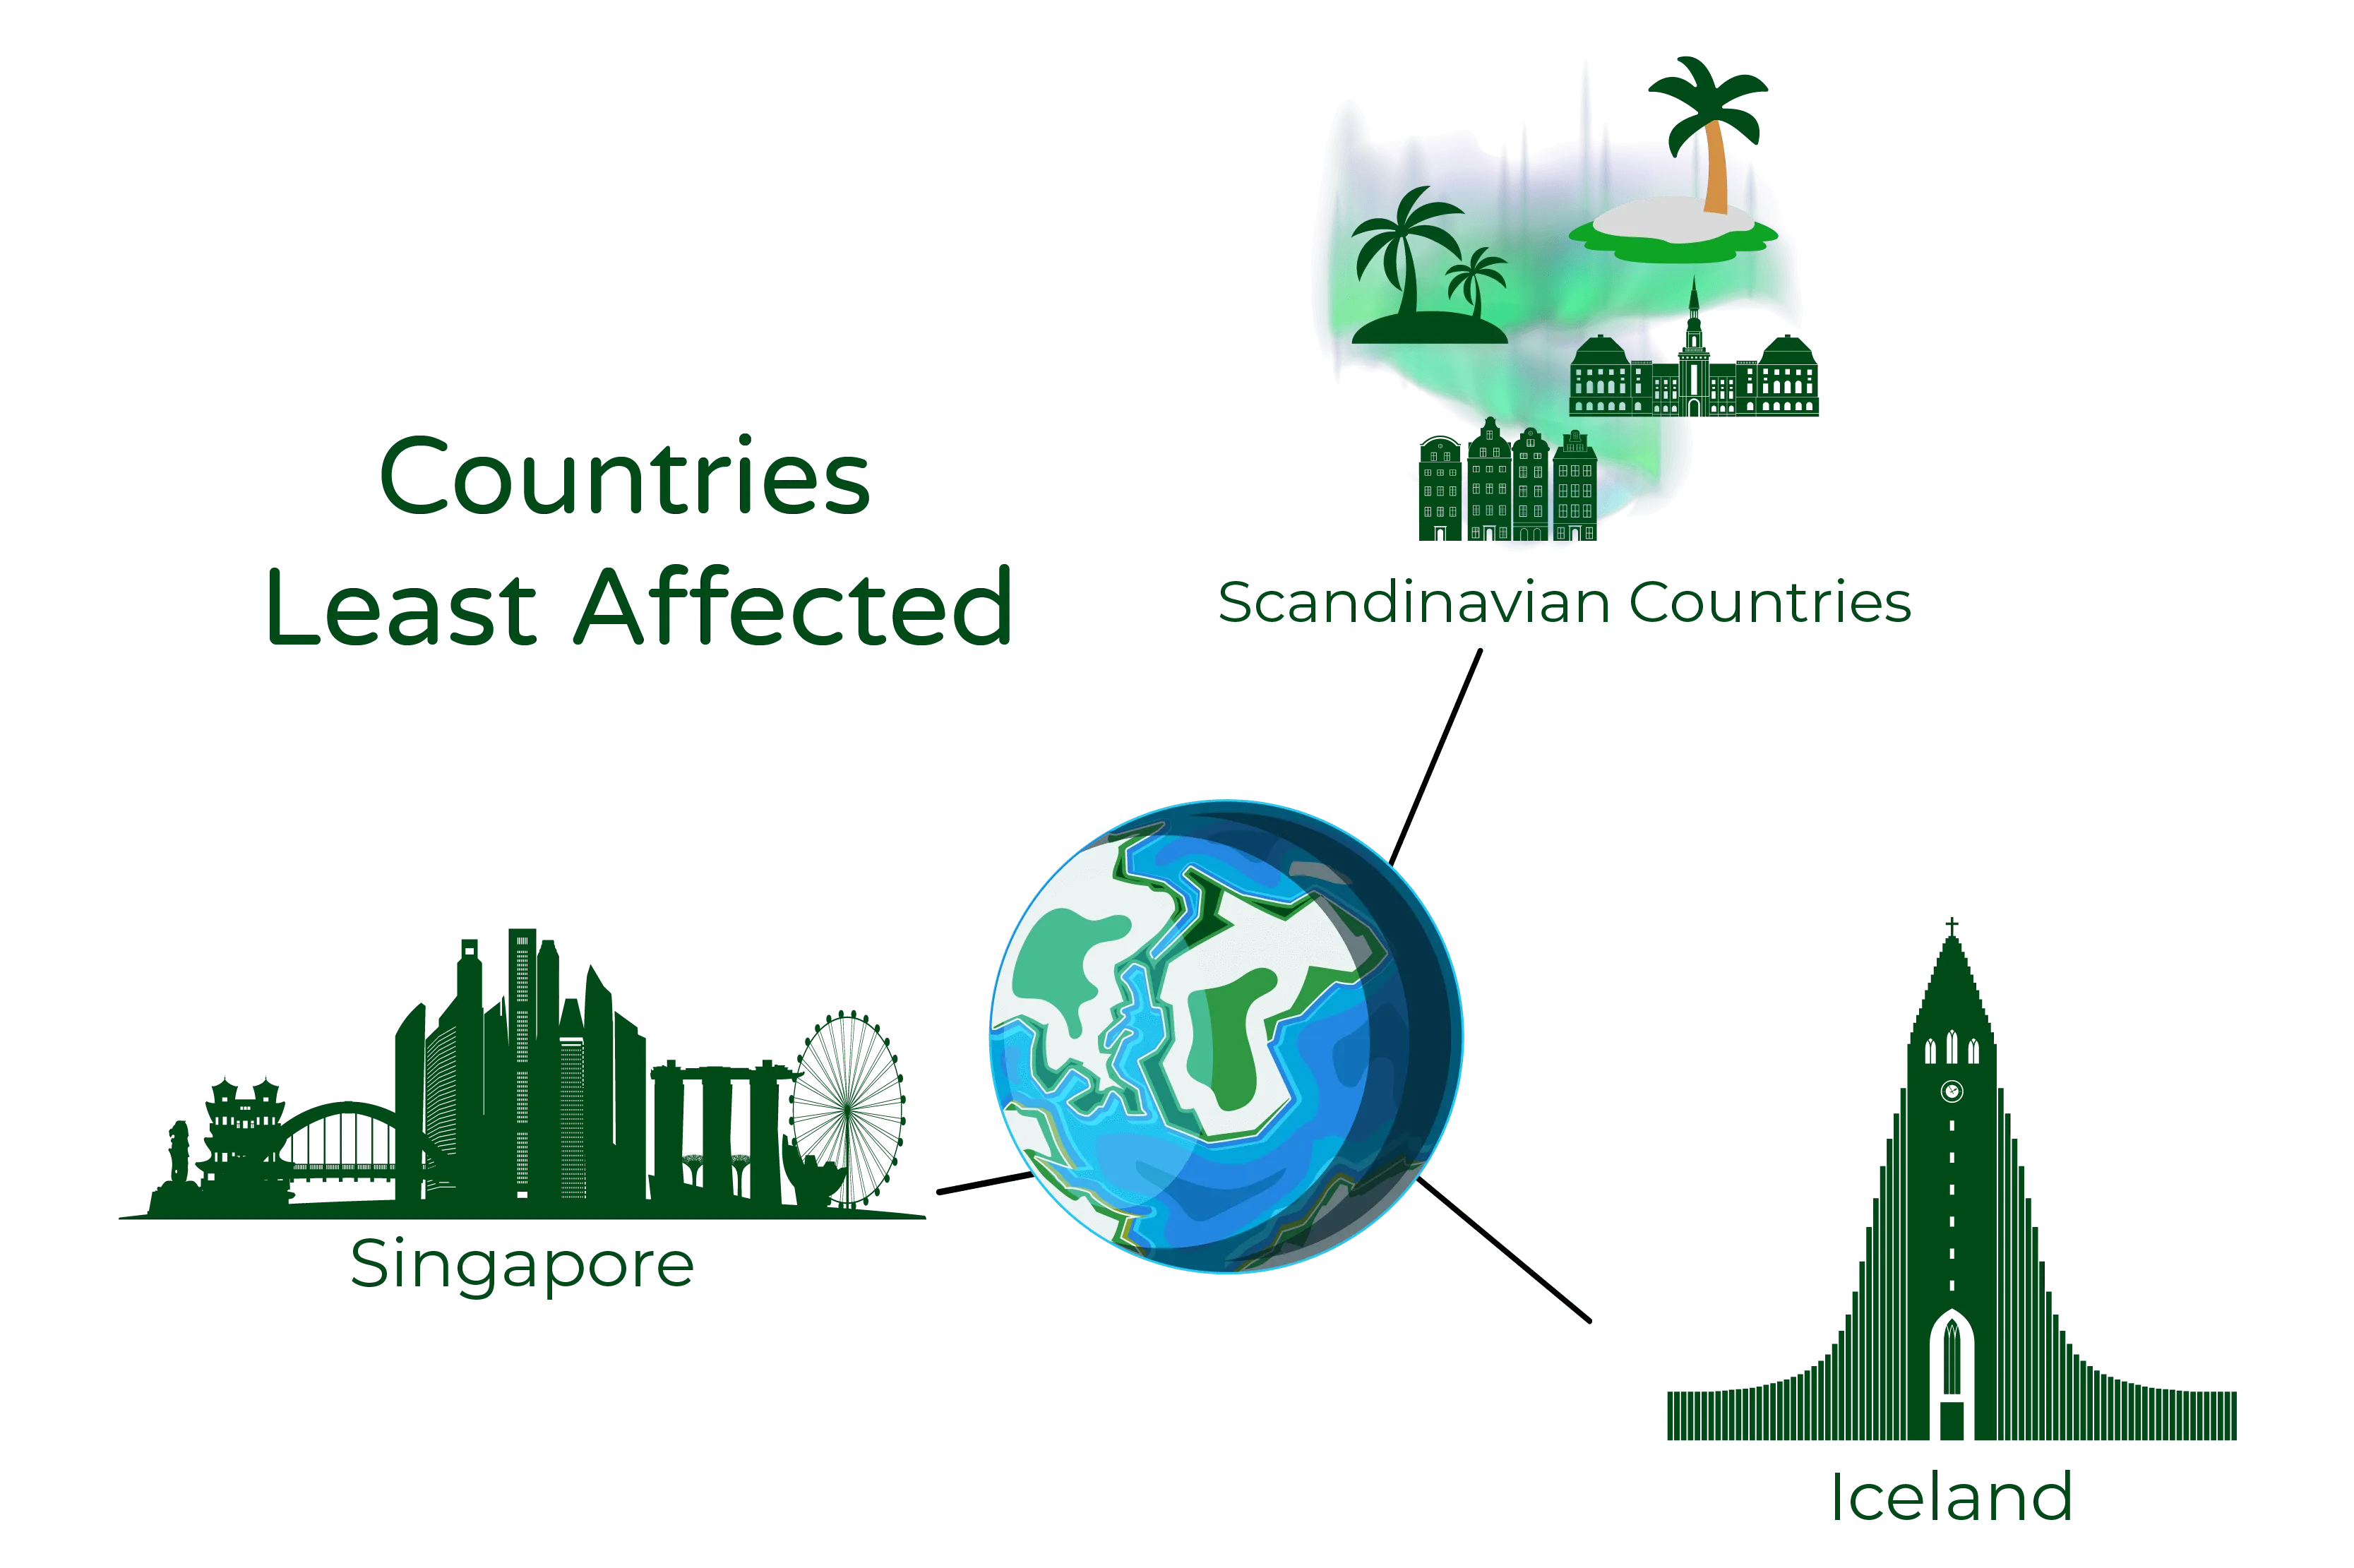 Illustration titled 'Countries Least Affected.' The illustration features a centered green globe with three visually represented categories of countries that are least affected by climate change: Scandinavian Countries, Iceland, and Singapore.